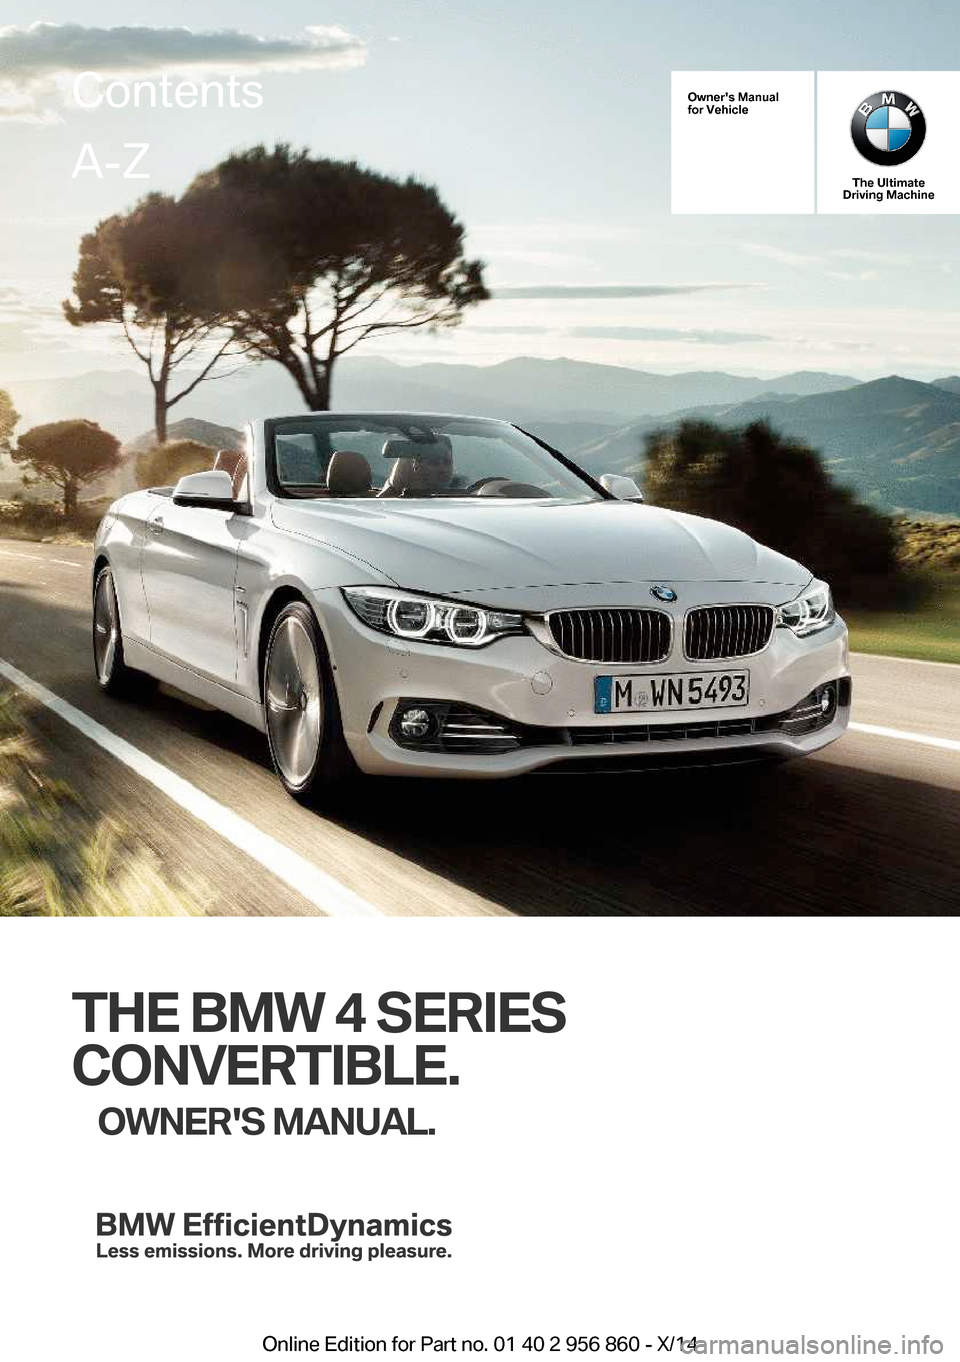 BMW 4 SERIES CONVERTIBLE 2014 F33 Owners Manual Owners Manual
for Vehicle
The Ultimate
Driving Machine
THE BMW 4 SERIES
CONVERTIBLE. OWNERS MANUAL.
ContentsA-Z
Online Edition for Part no. 01 40 2 956 860 - X/14   